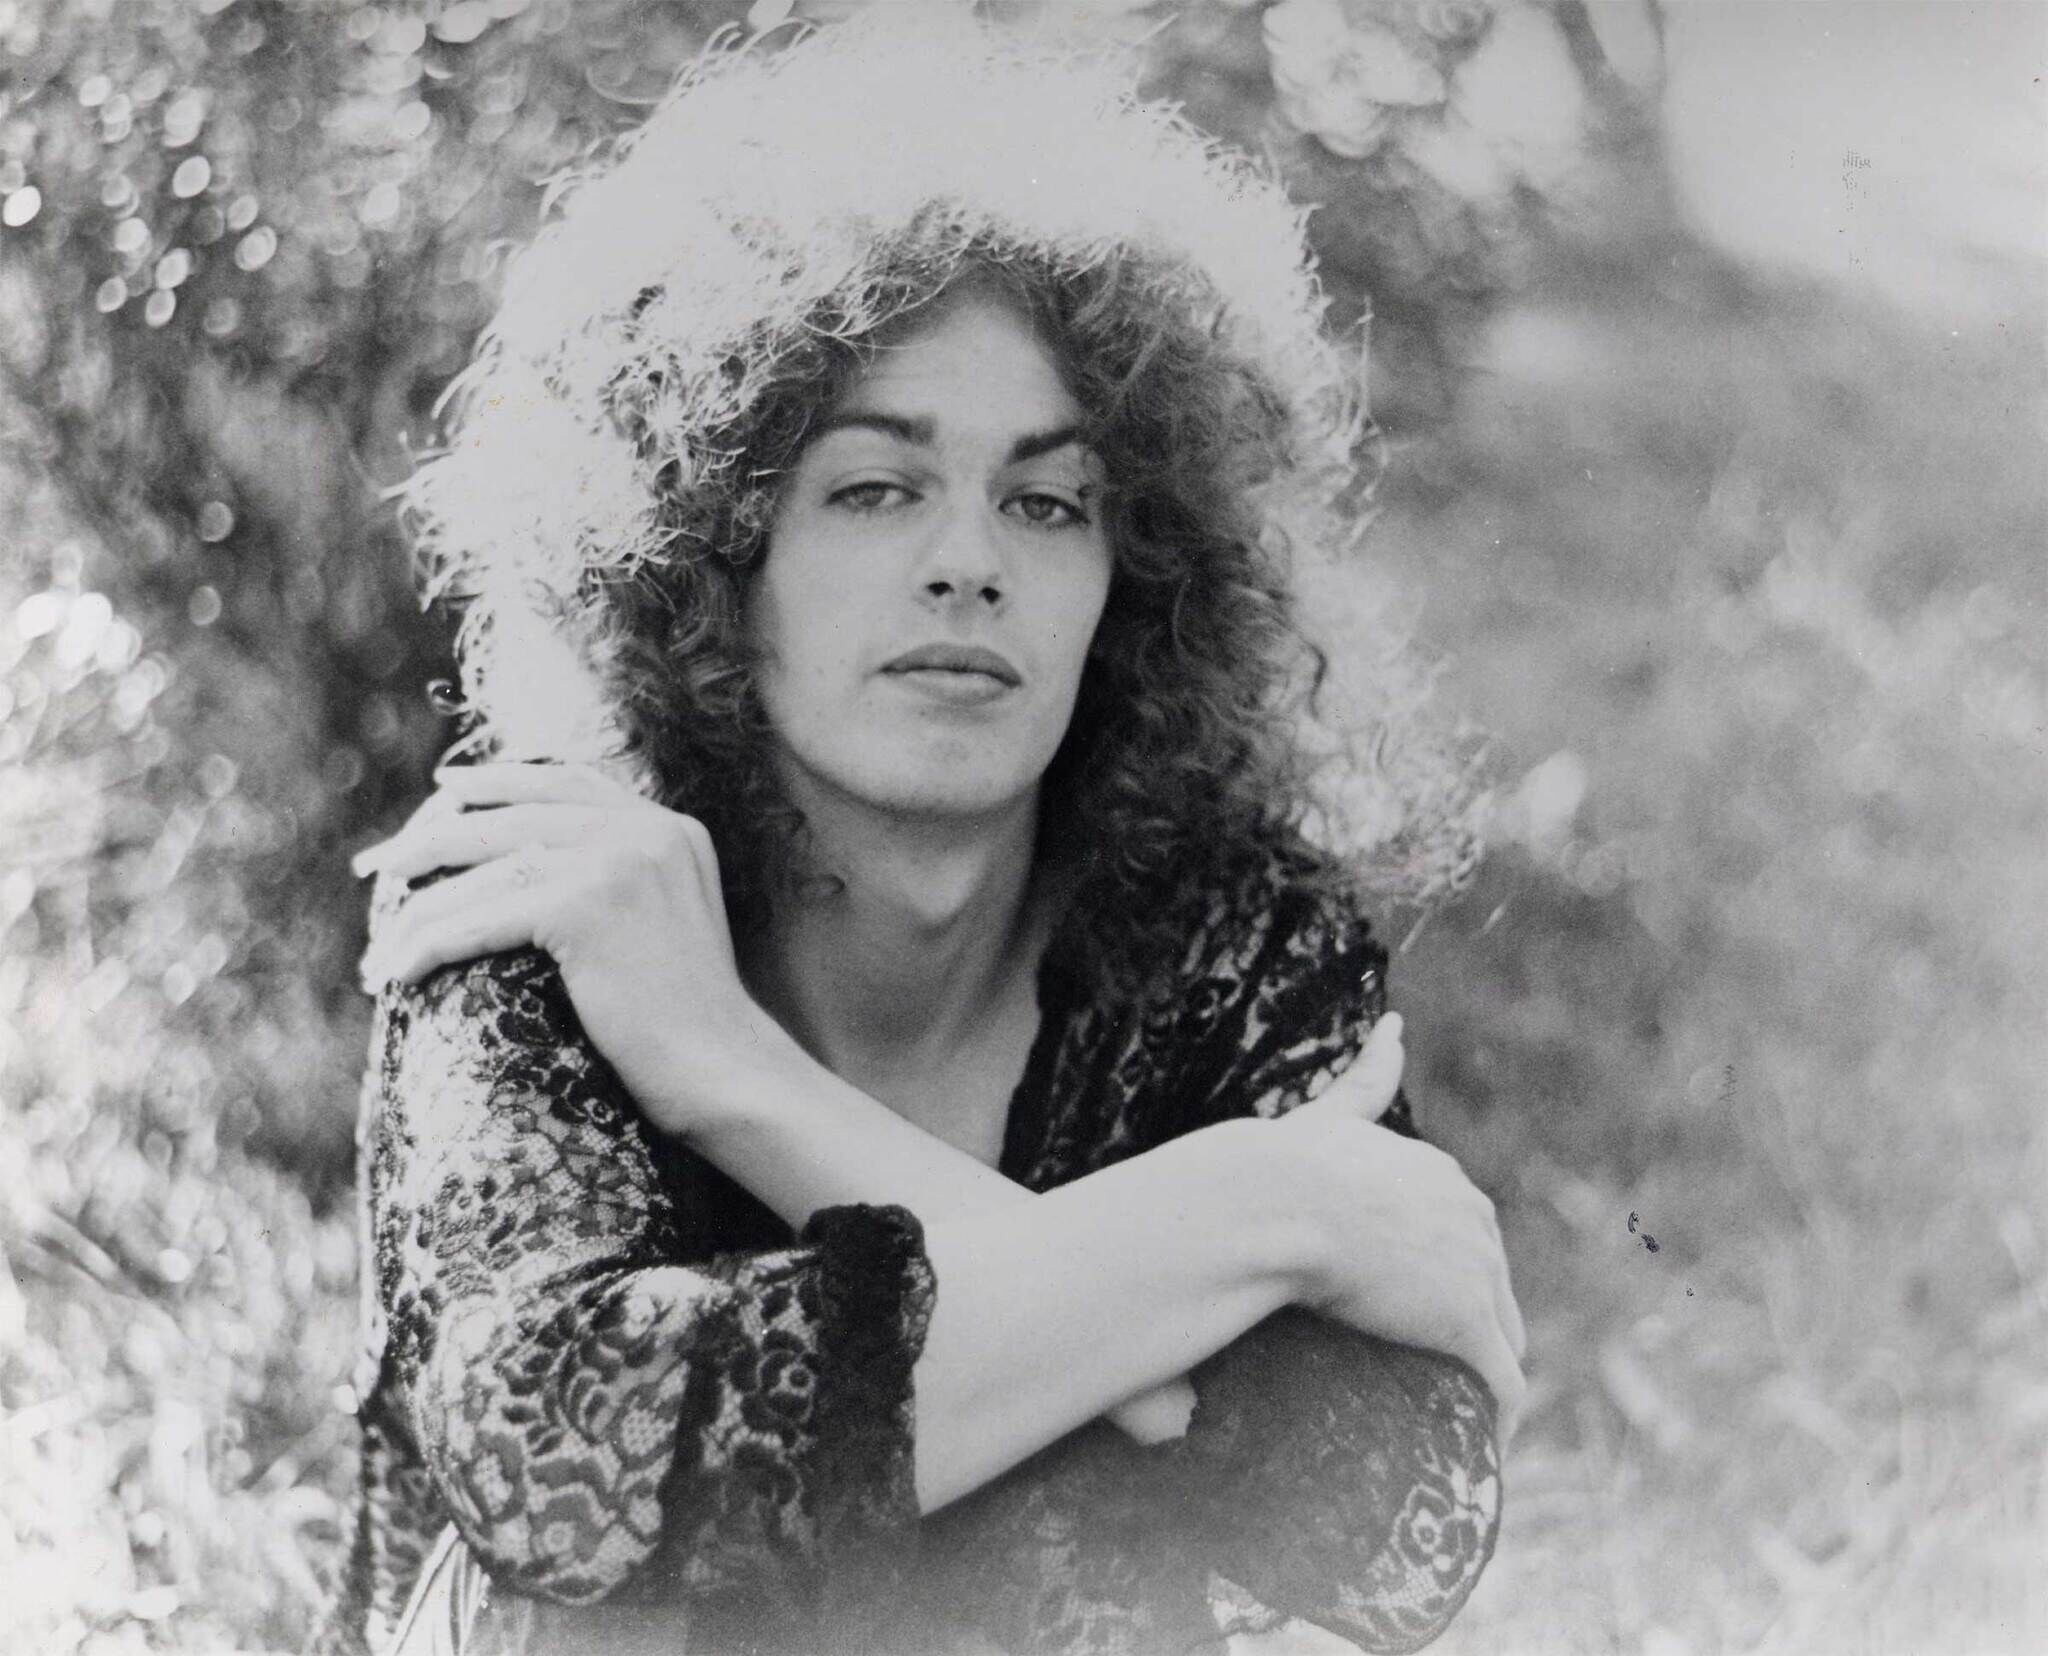 Black and white photo of a person with curly hair sitting outdoors, resting their chin on crossed arms.